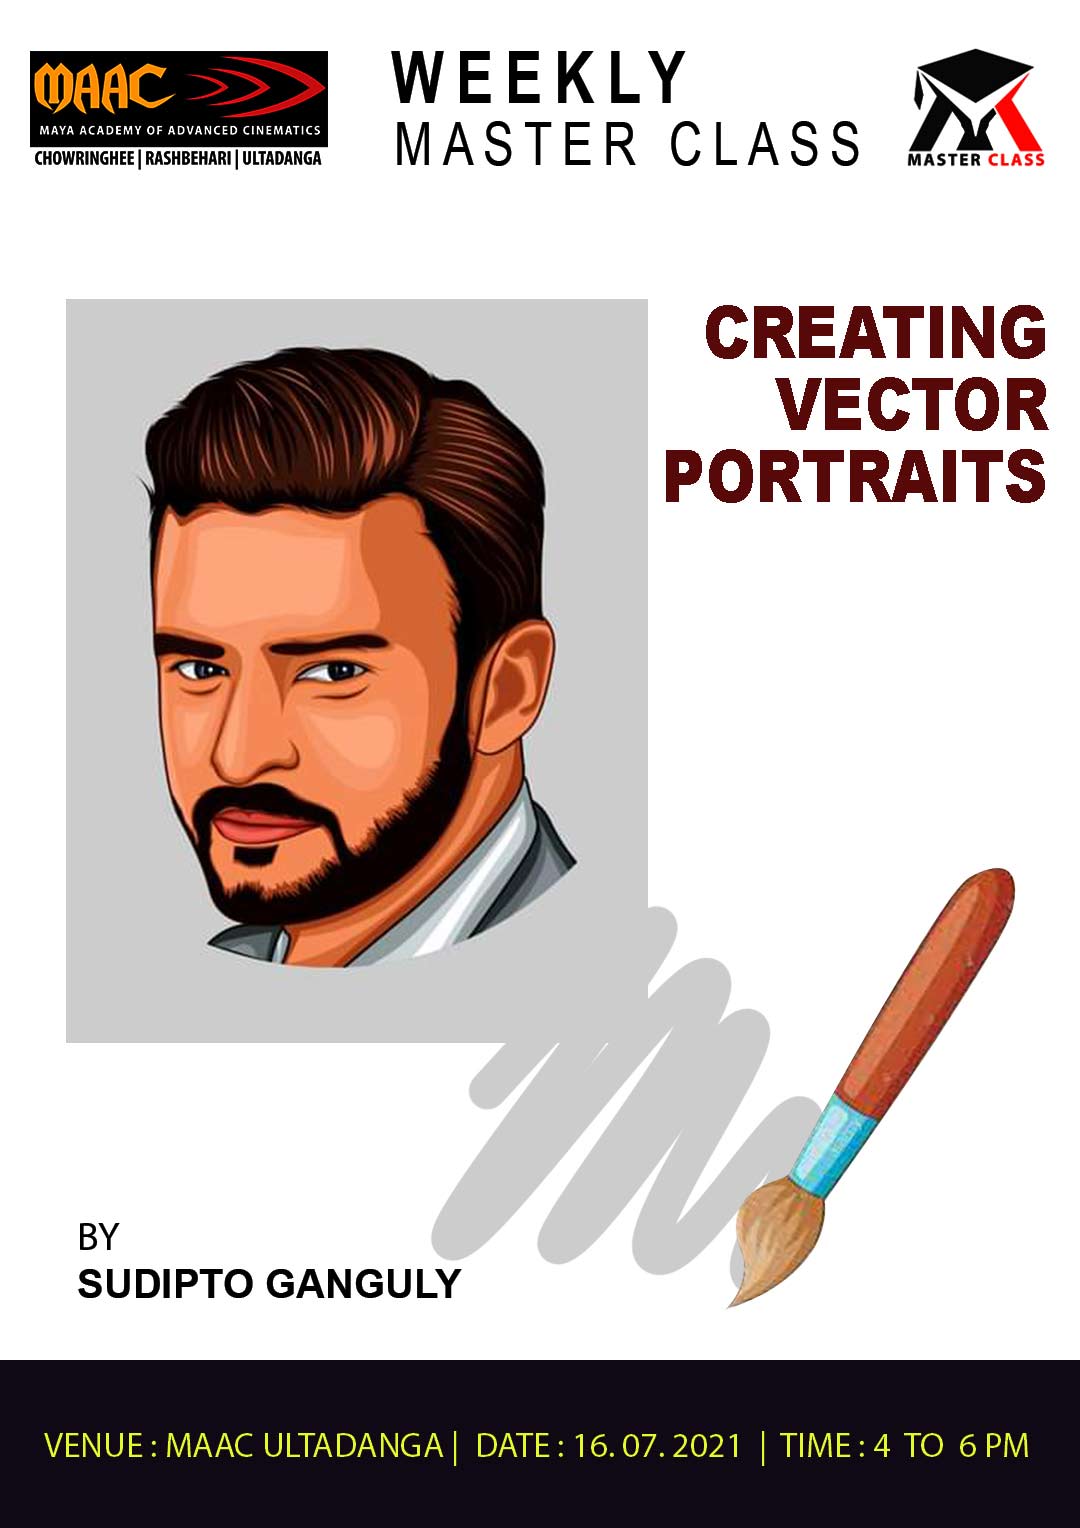 Weekly Master Class on Creative Vector Portraits